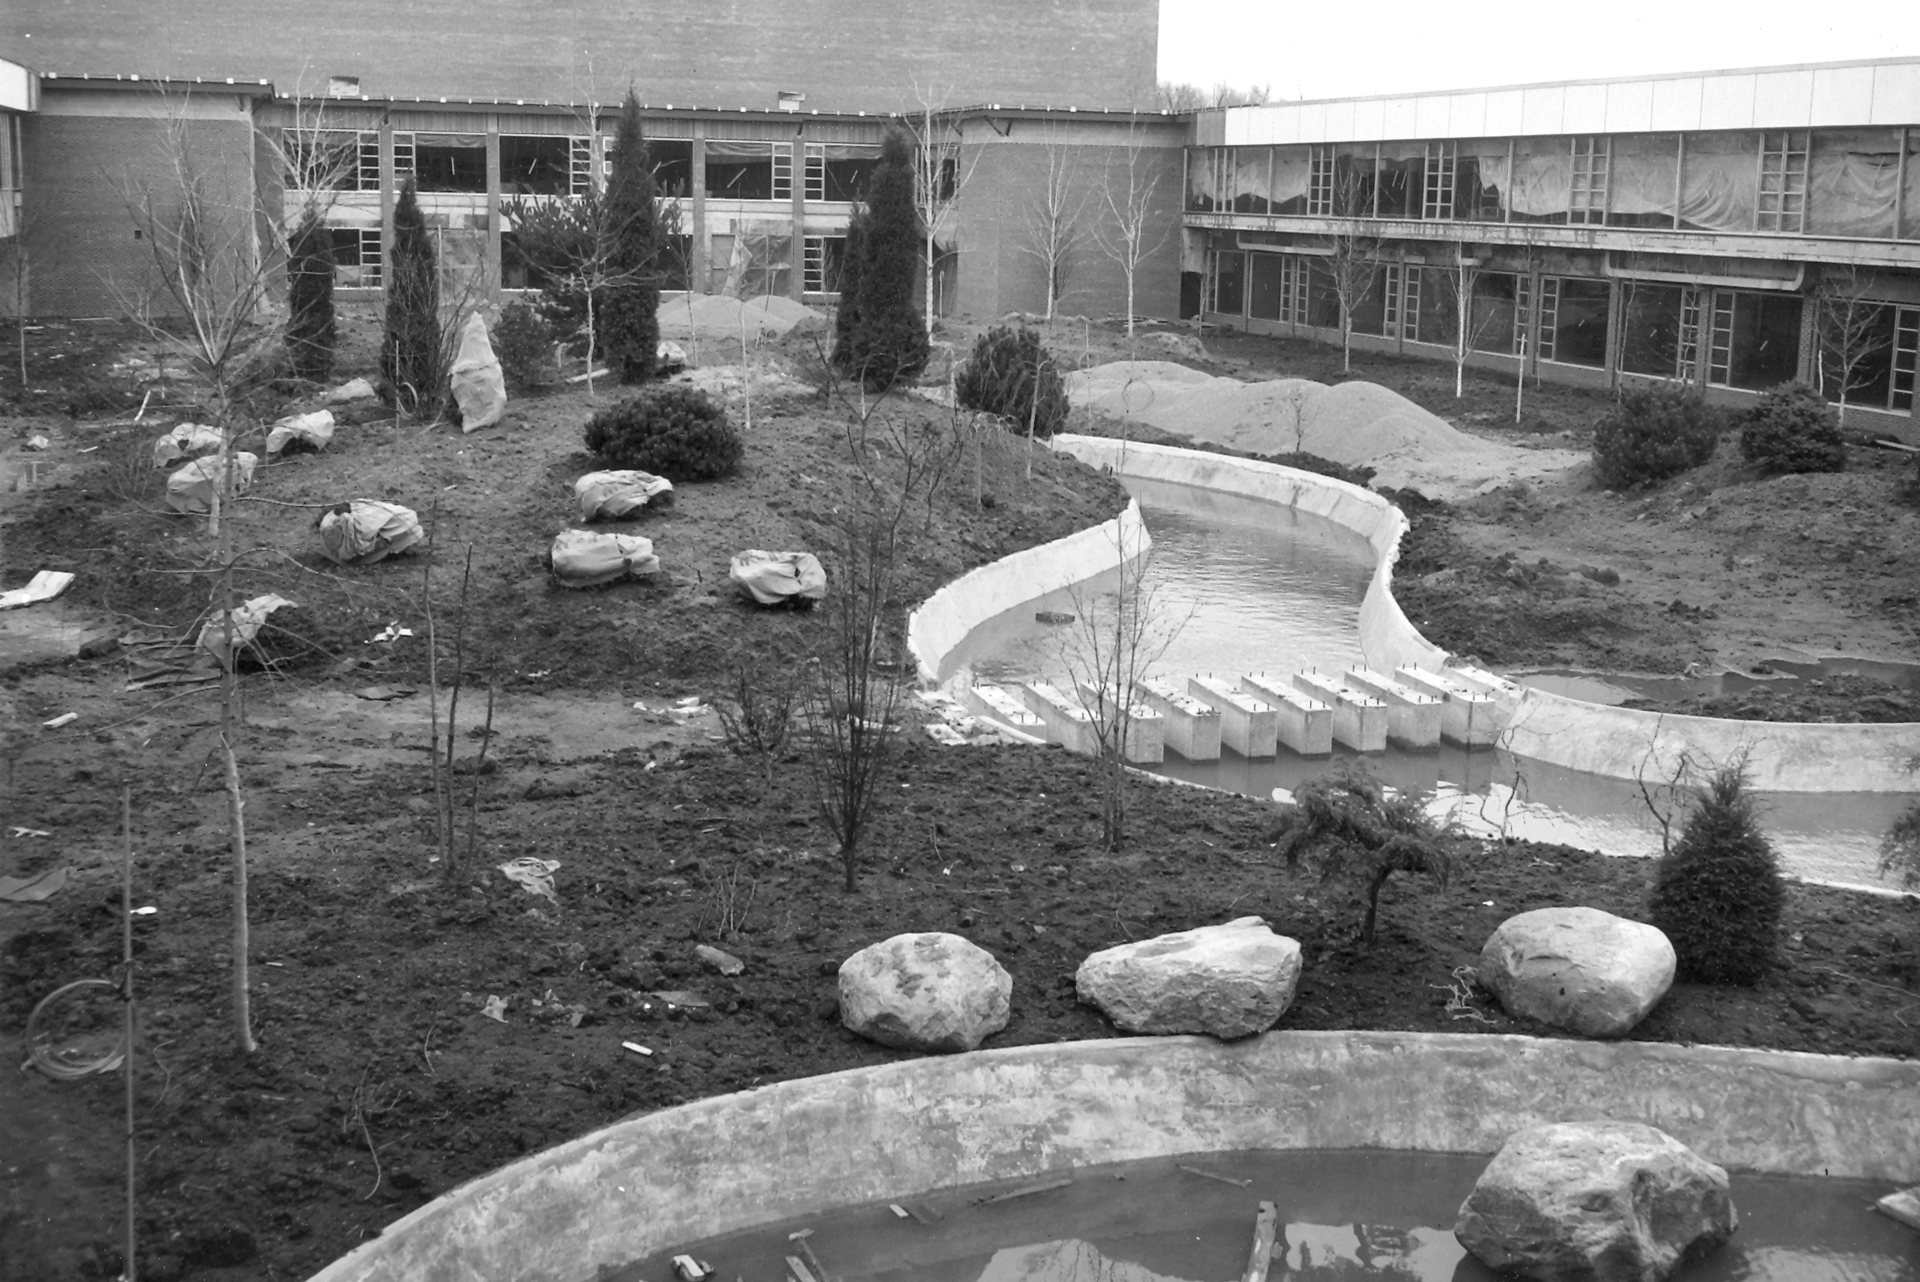 Construction of the Delta College Courtyard in 1961.